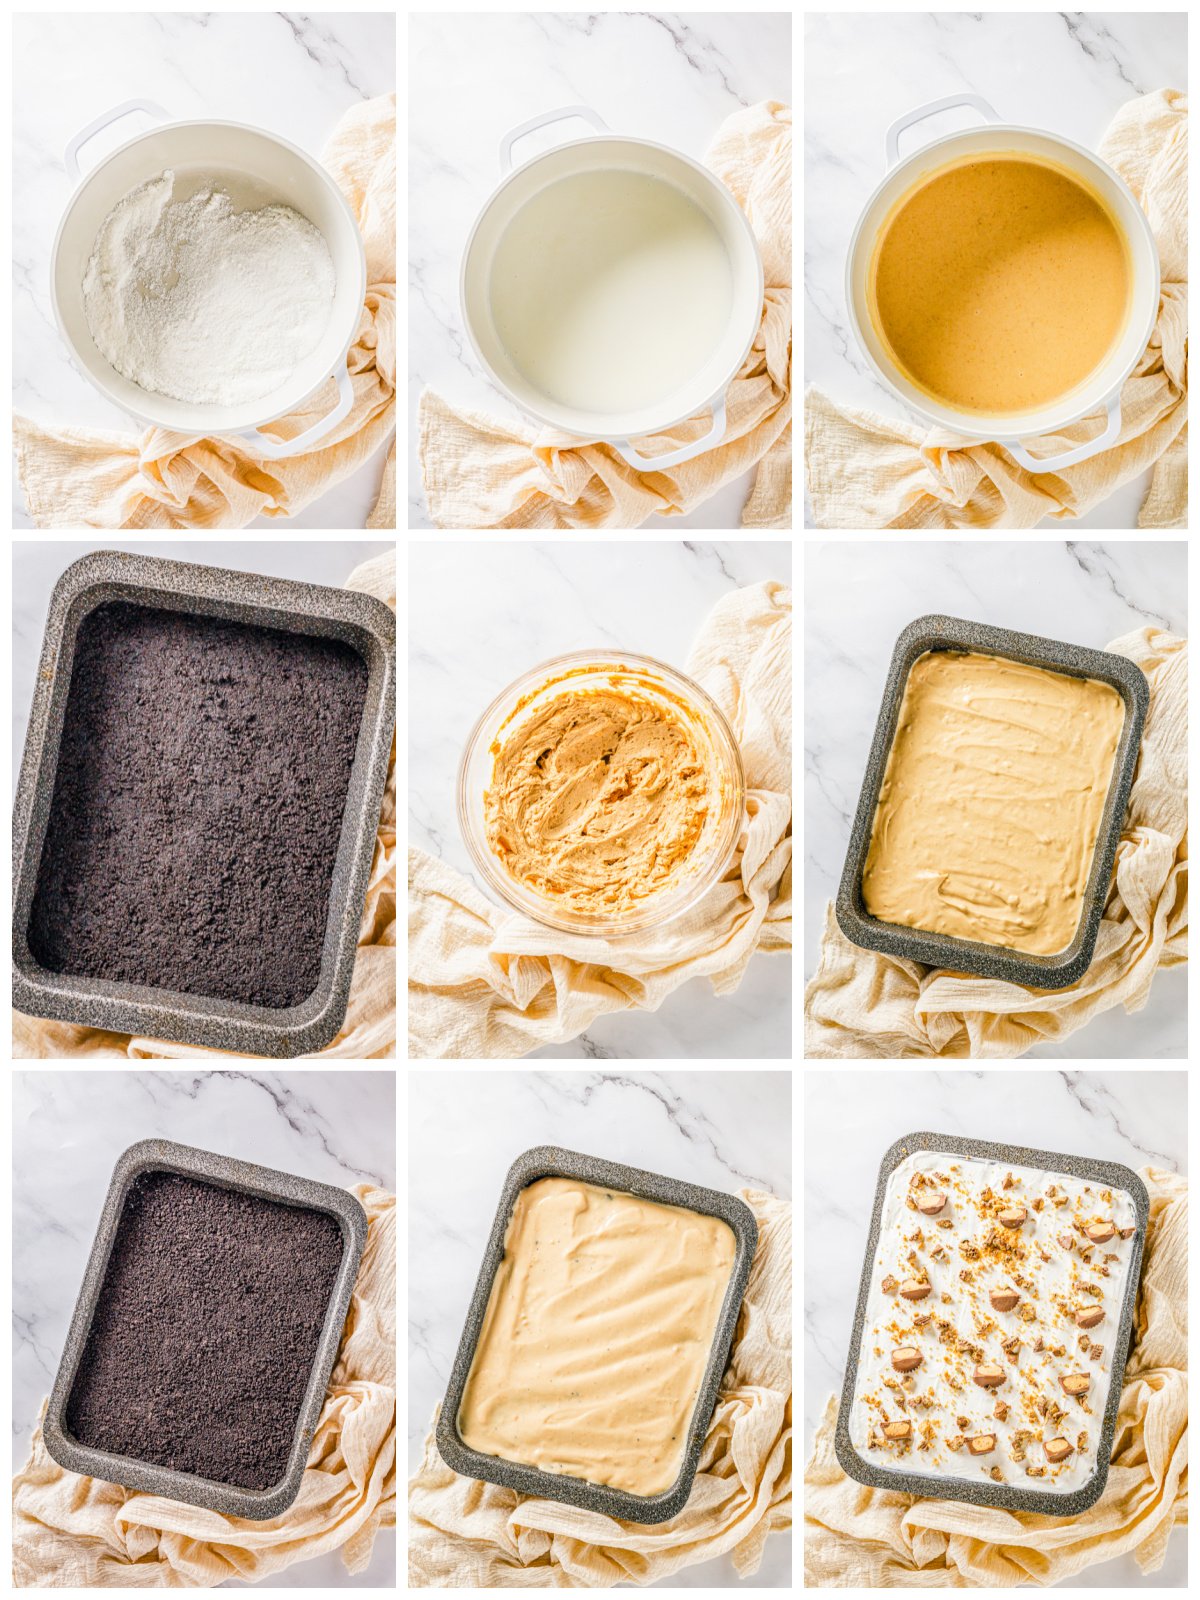 Step by step photos on how to make Peanut Butter Lasagna.